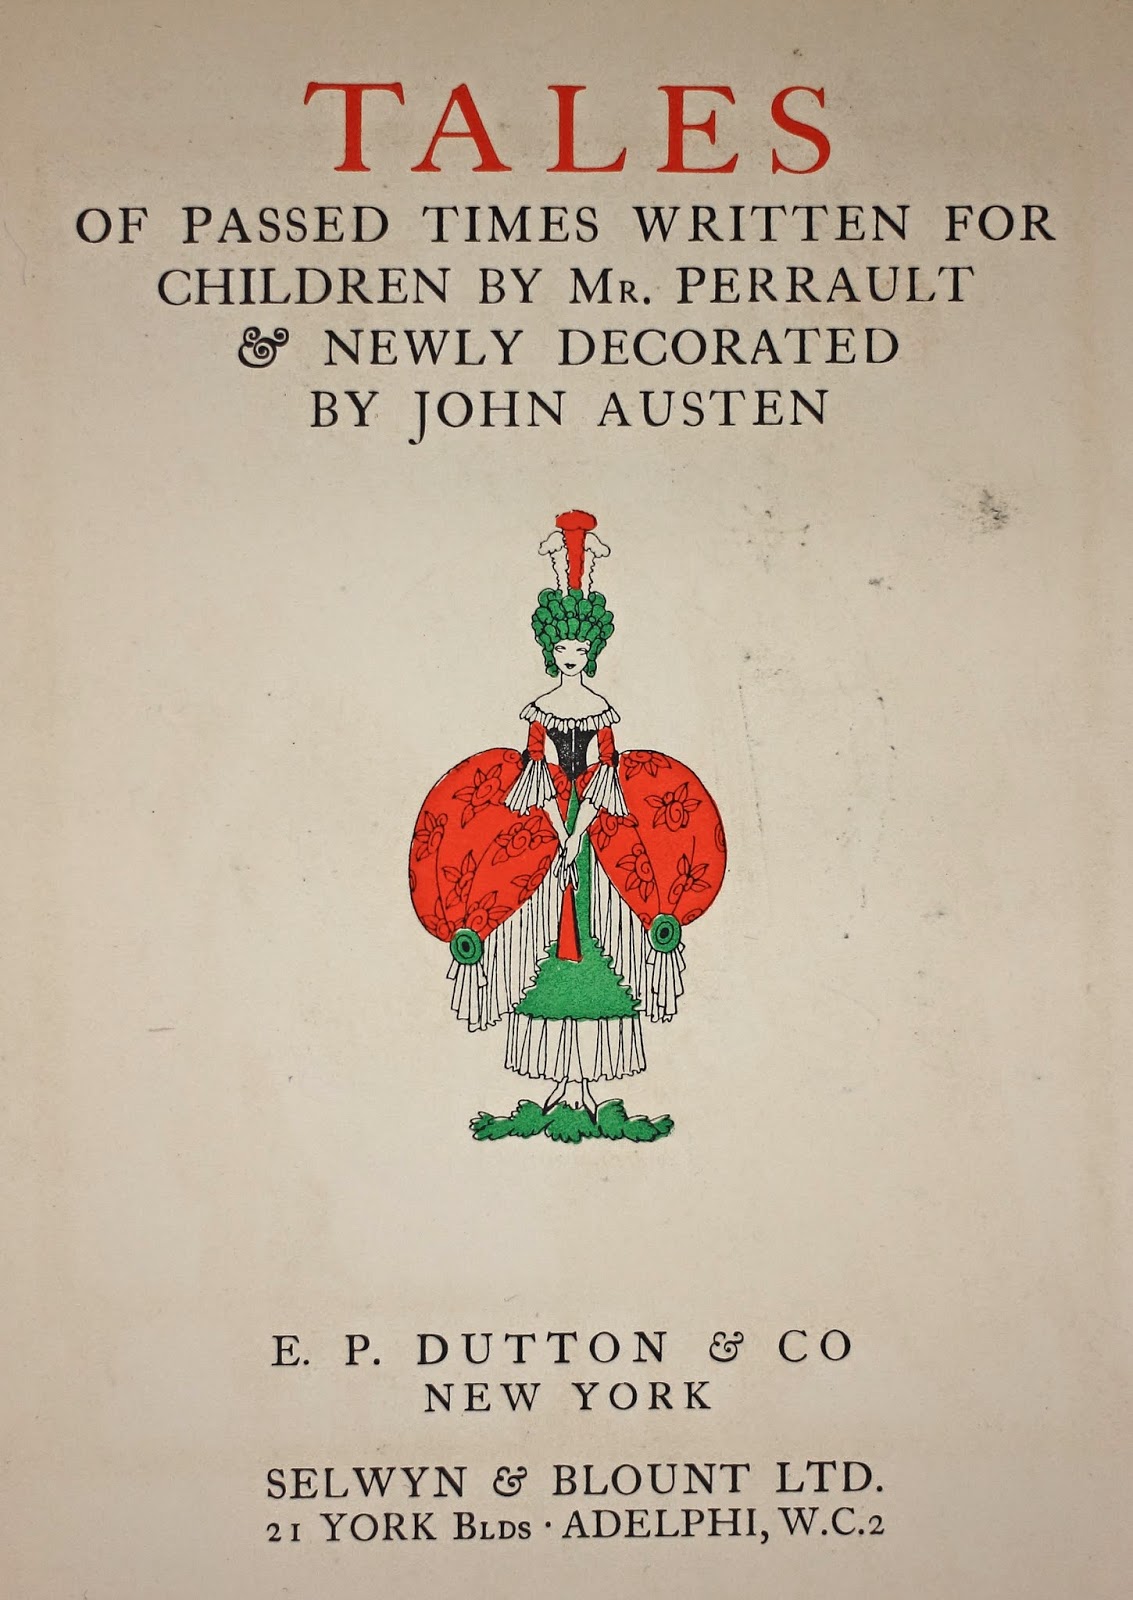 Cover of book "Tales of Past Times Written for Children"